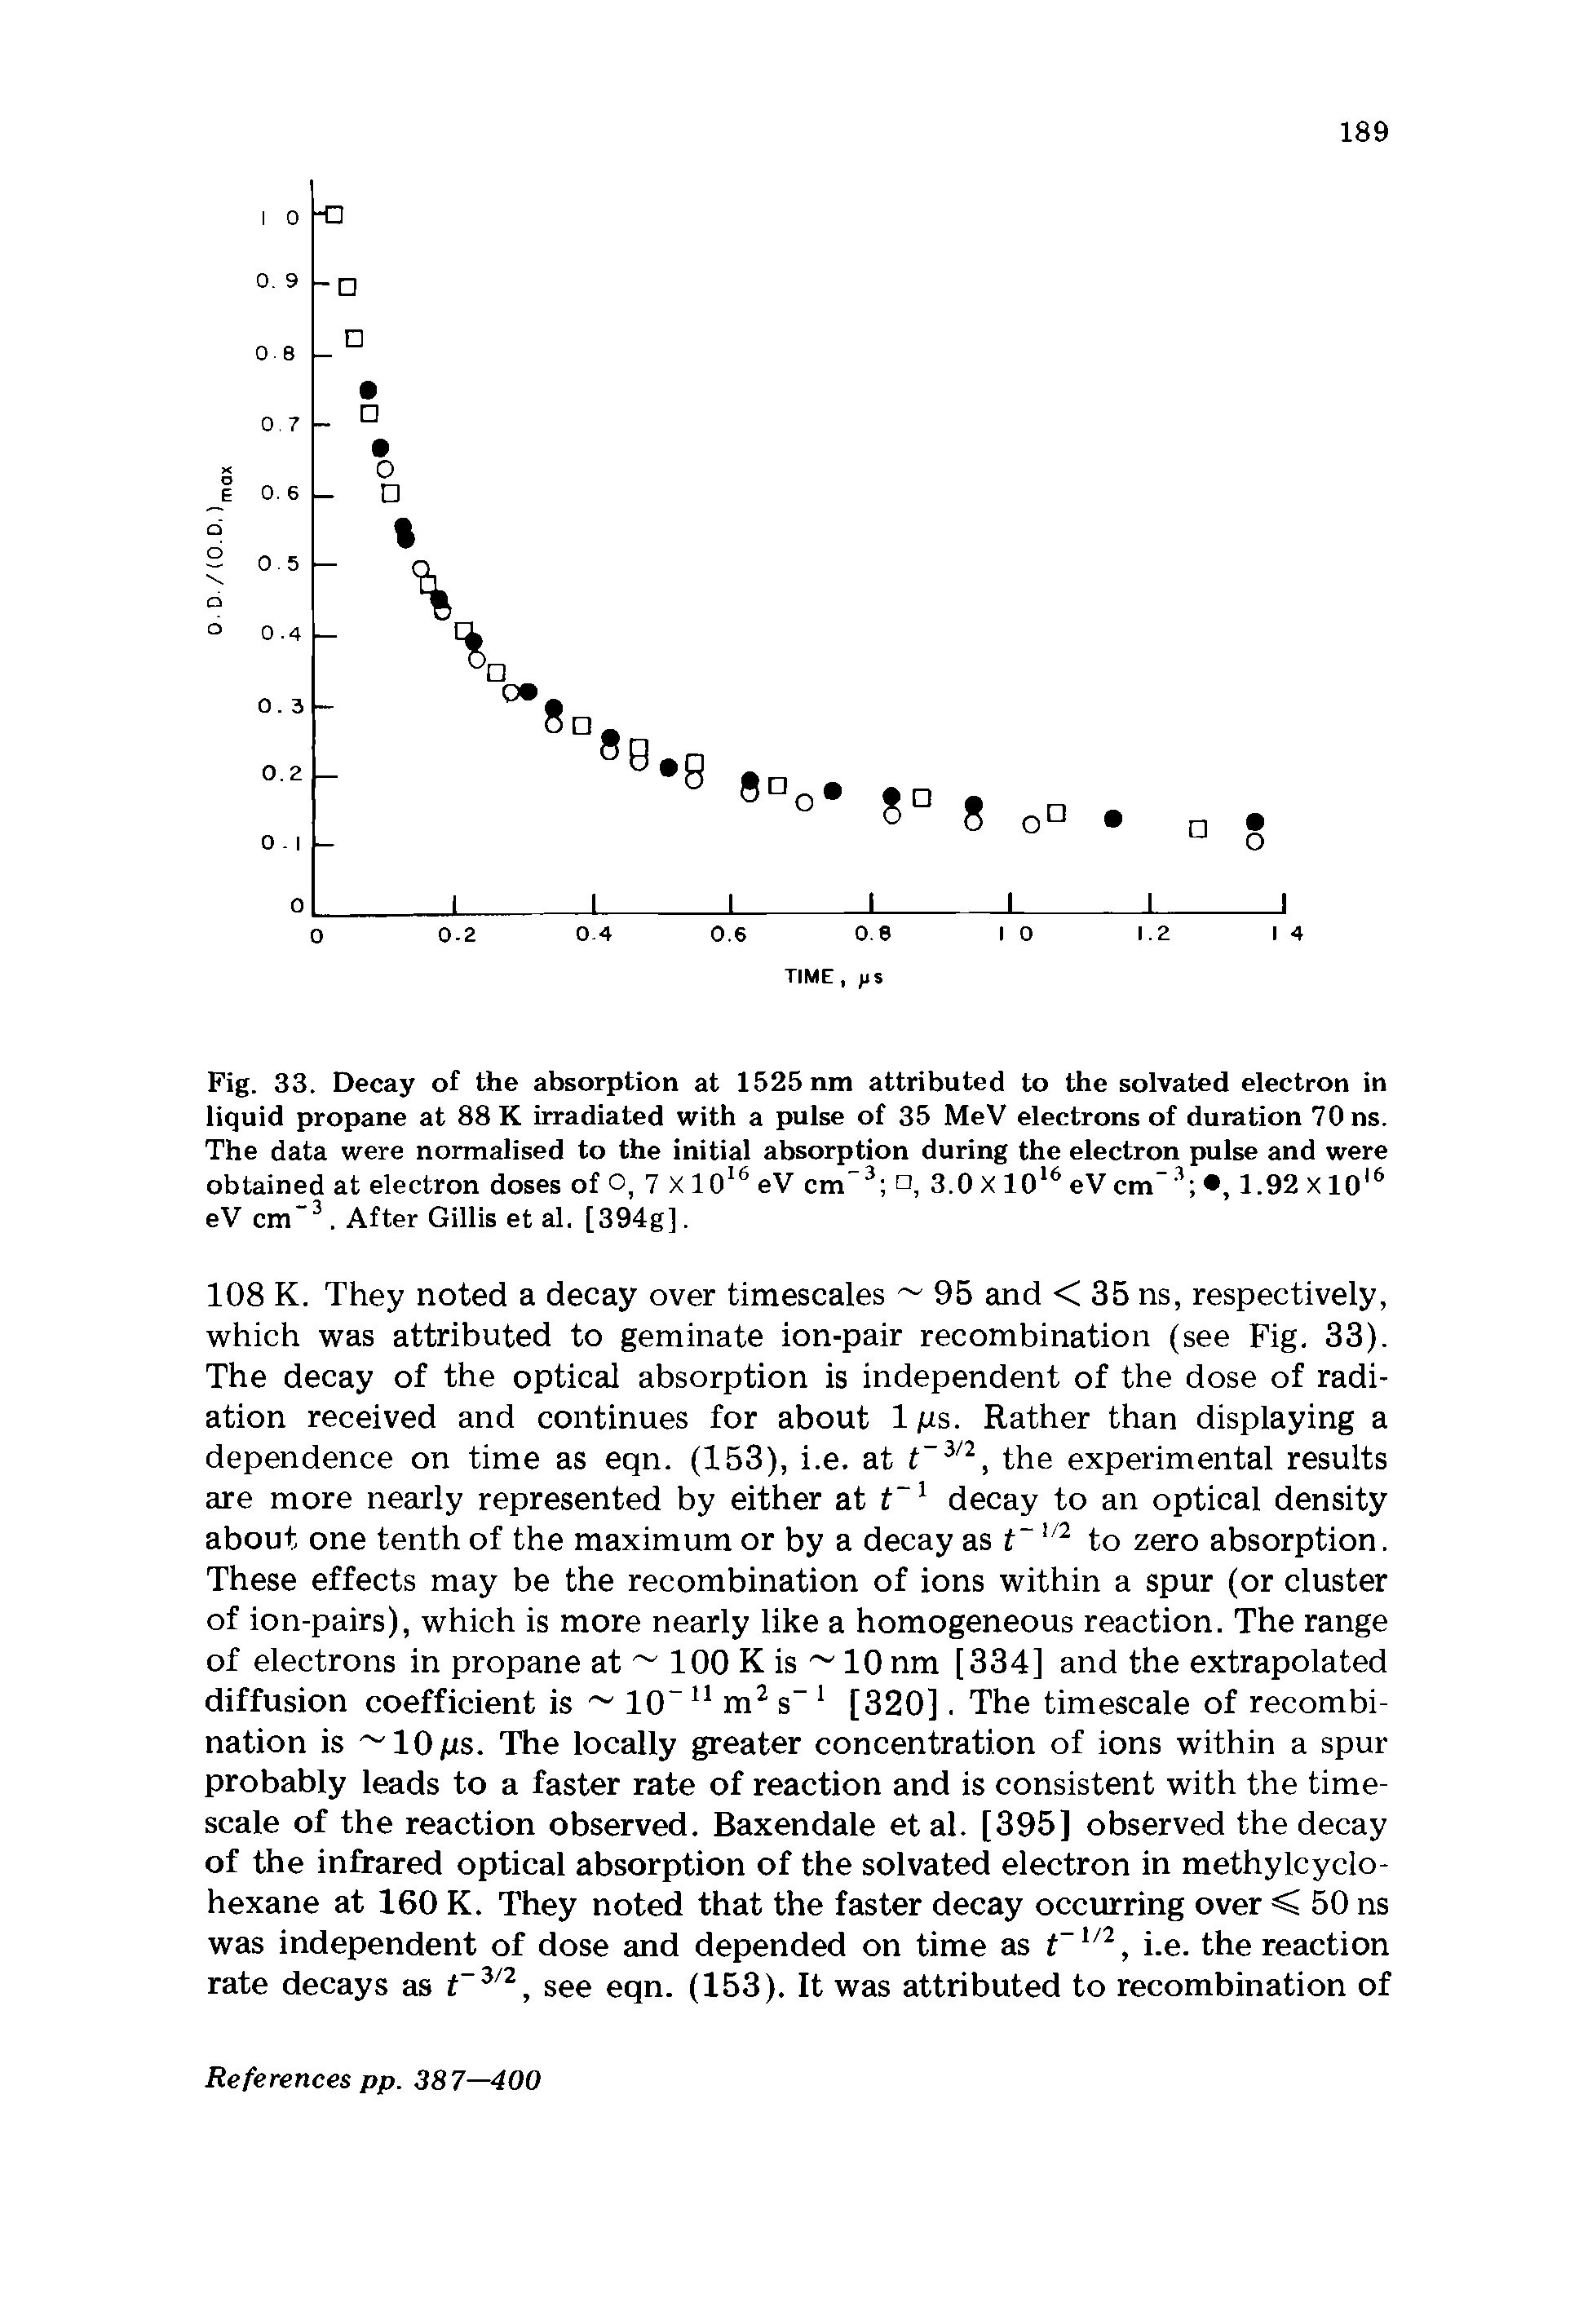 Fig. 33. Decay of the absorption at 1525 nm attributed to the solvated electron in liquid propane at 88 K irradiated with a pulse of 35 MeV electrons of duration 70 ns. The data were normalised to the initial absorption during the electron pulse and were obtained at electron doses of O, 7 X 1016 eV cm 3 n, 3.0 X 1016 eV cm 3 , 1.92 X1016 eV cm 3. After Gillis et al. [394g].